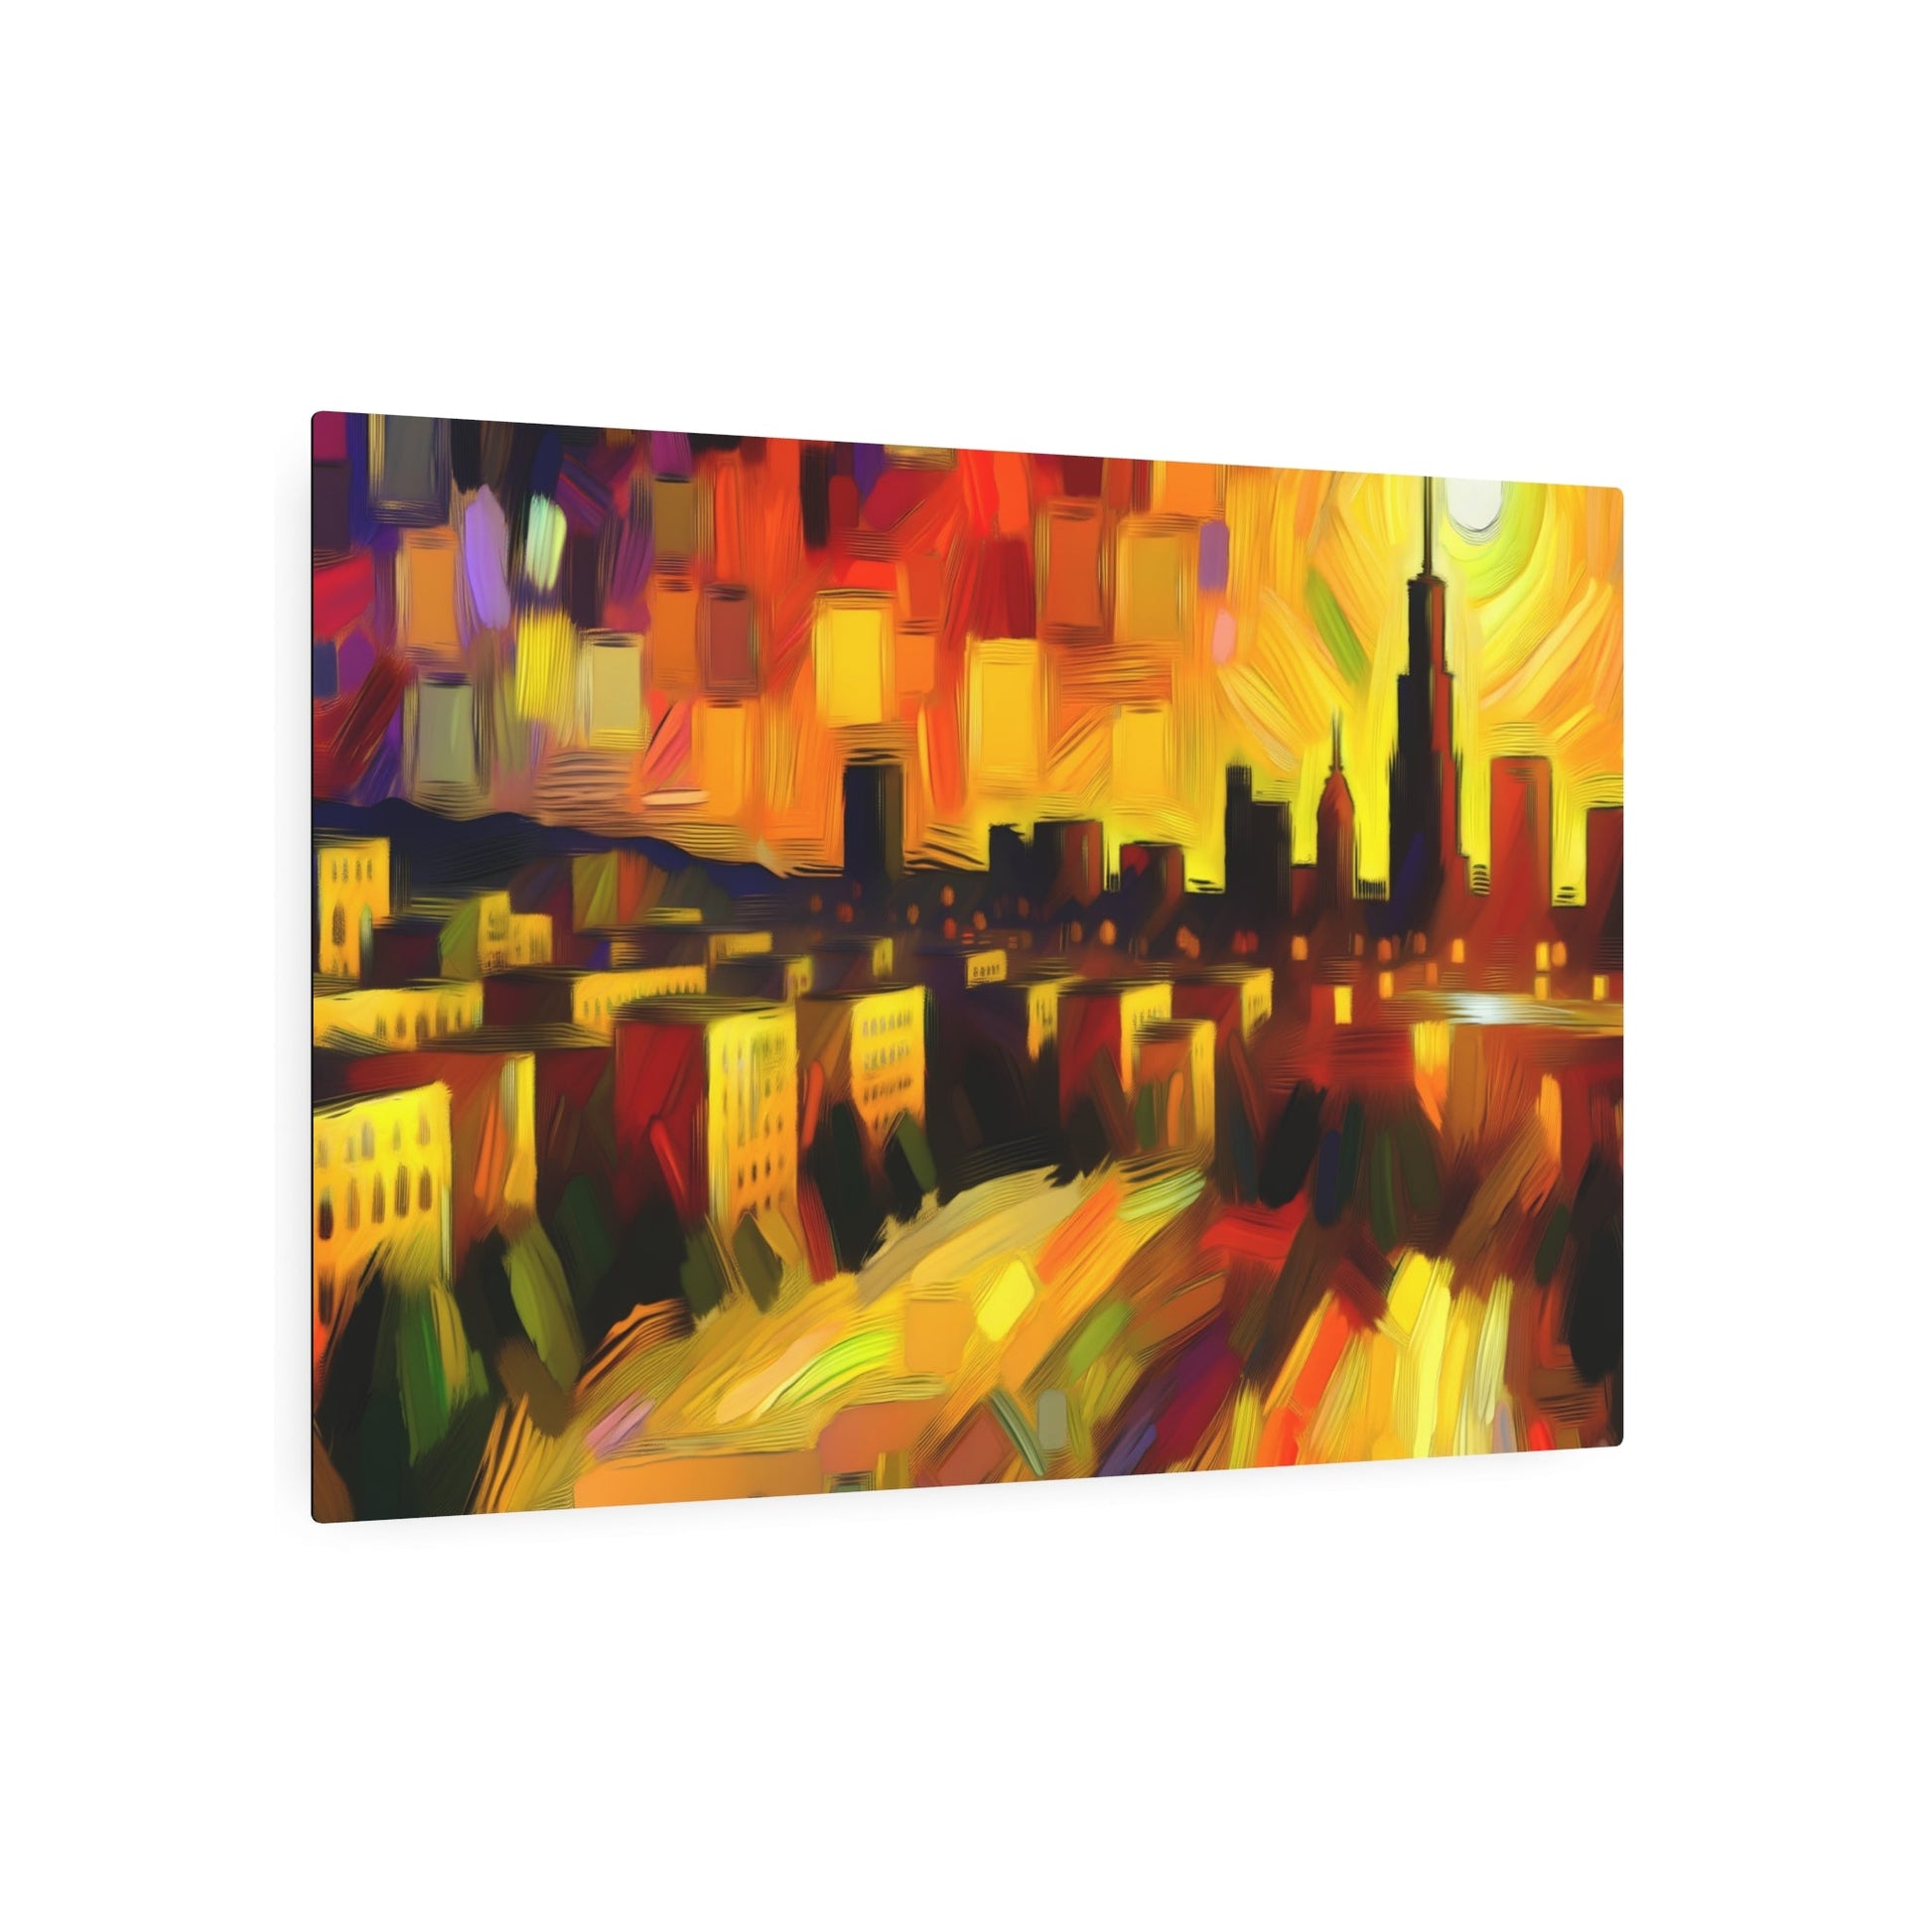 Metal Poster Art | "Expressionist Western Art Style: Emotional Cityscape at Sunset Artwork" - Metal Poster Art 36″ x 24″ (Horizontal) 0.12''